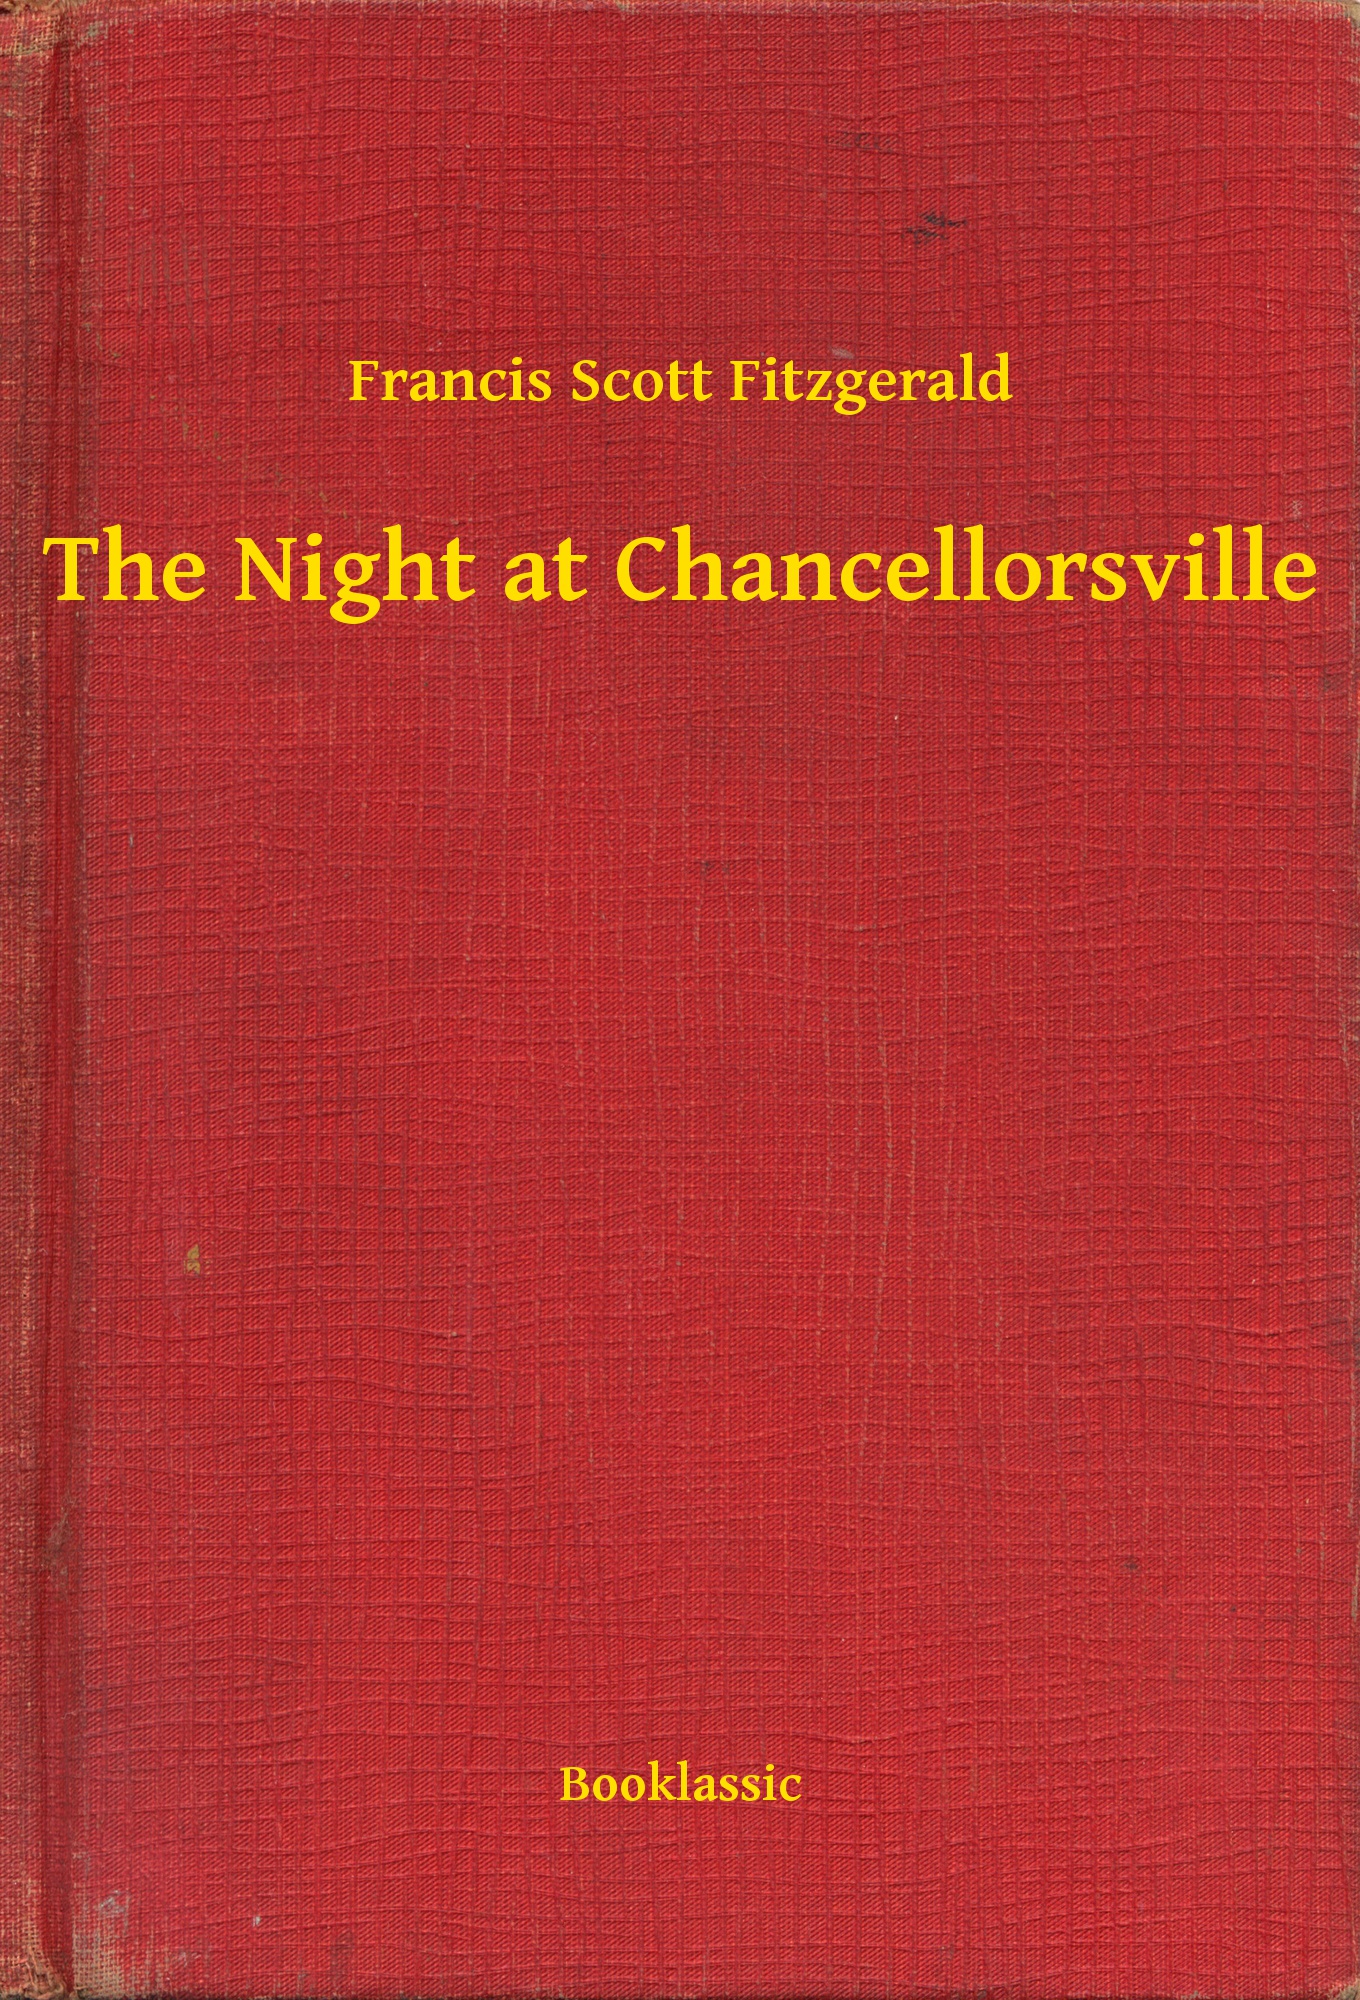 The Night at Chancellorsville